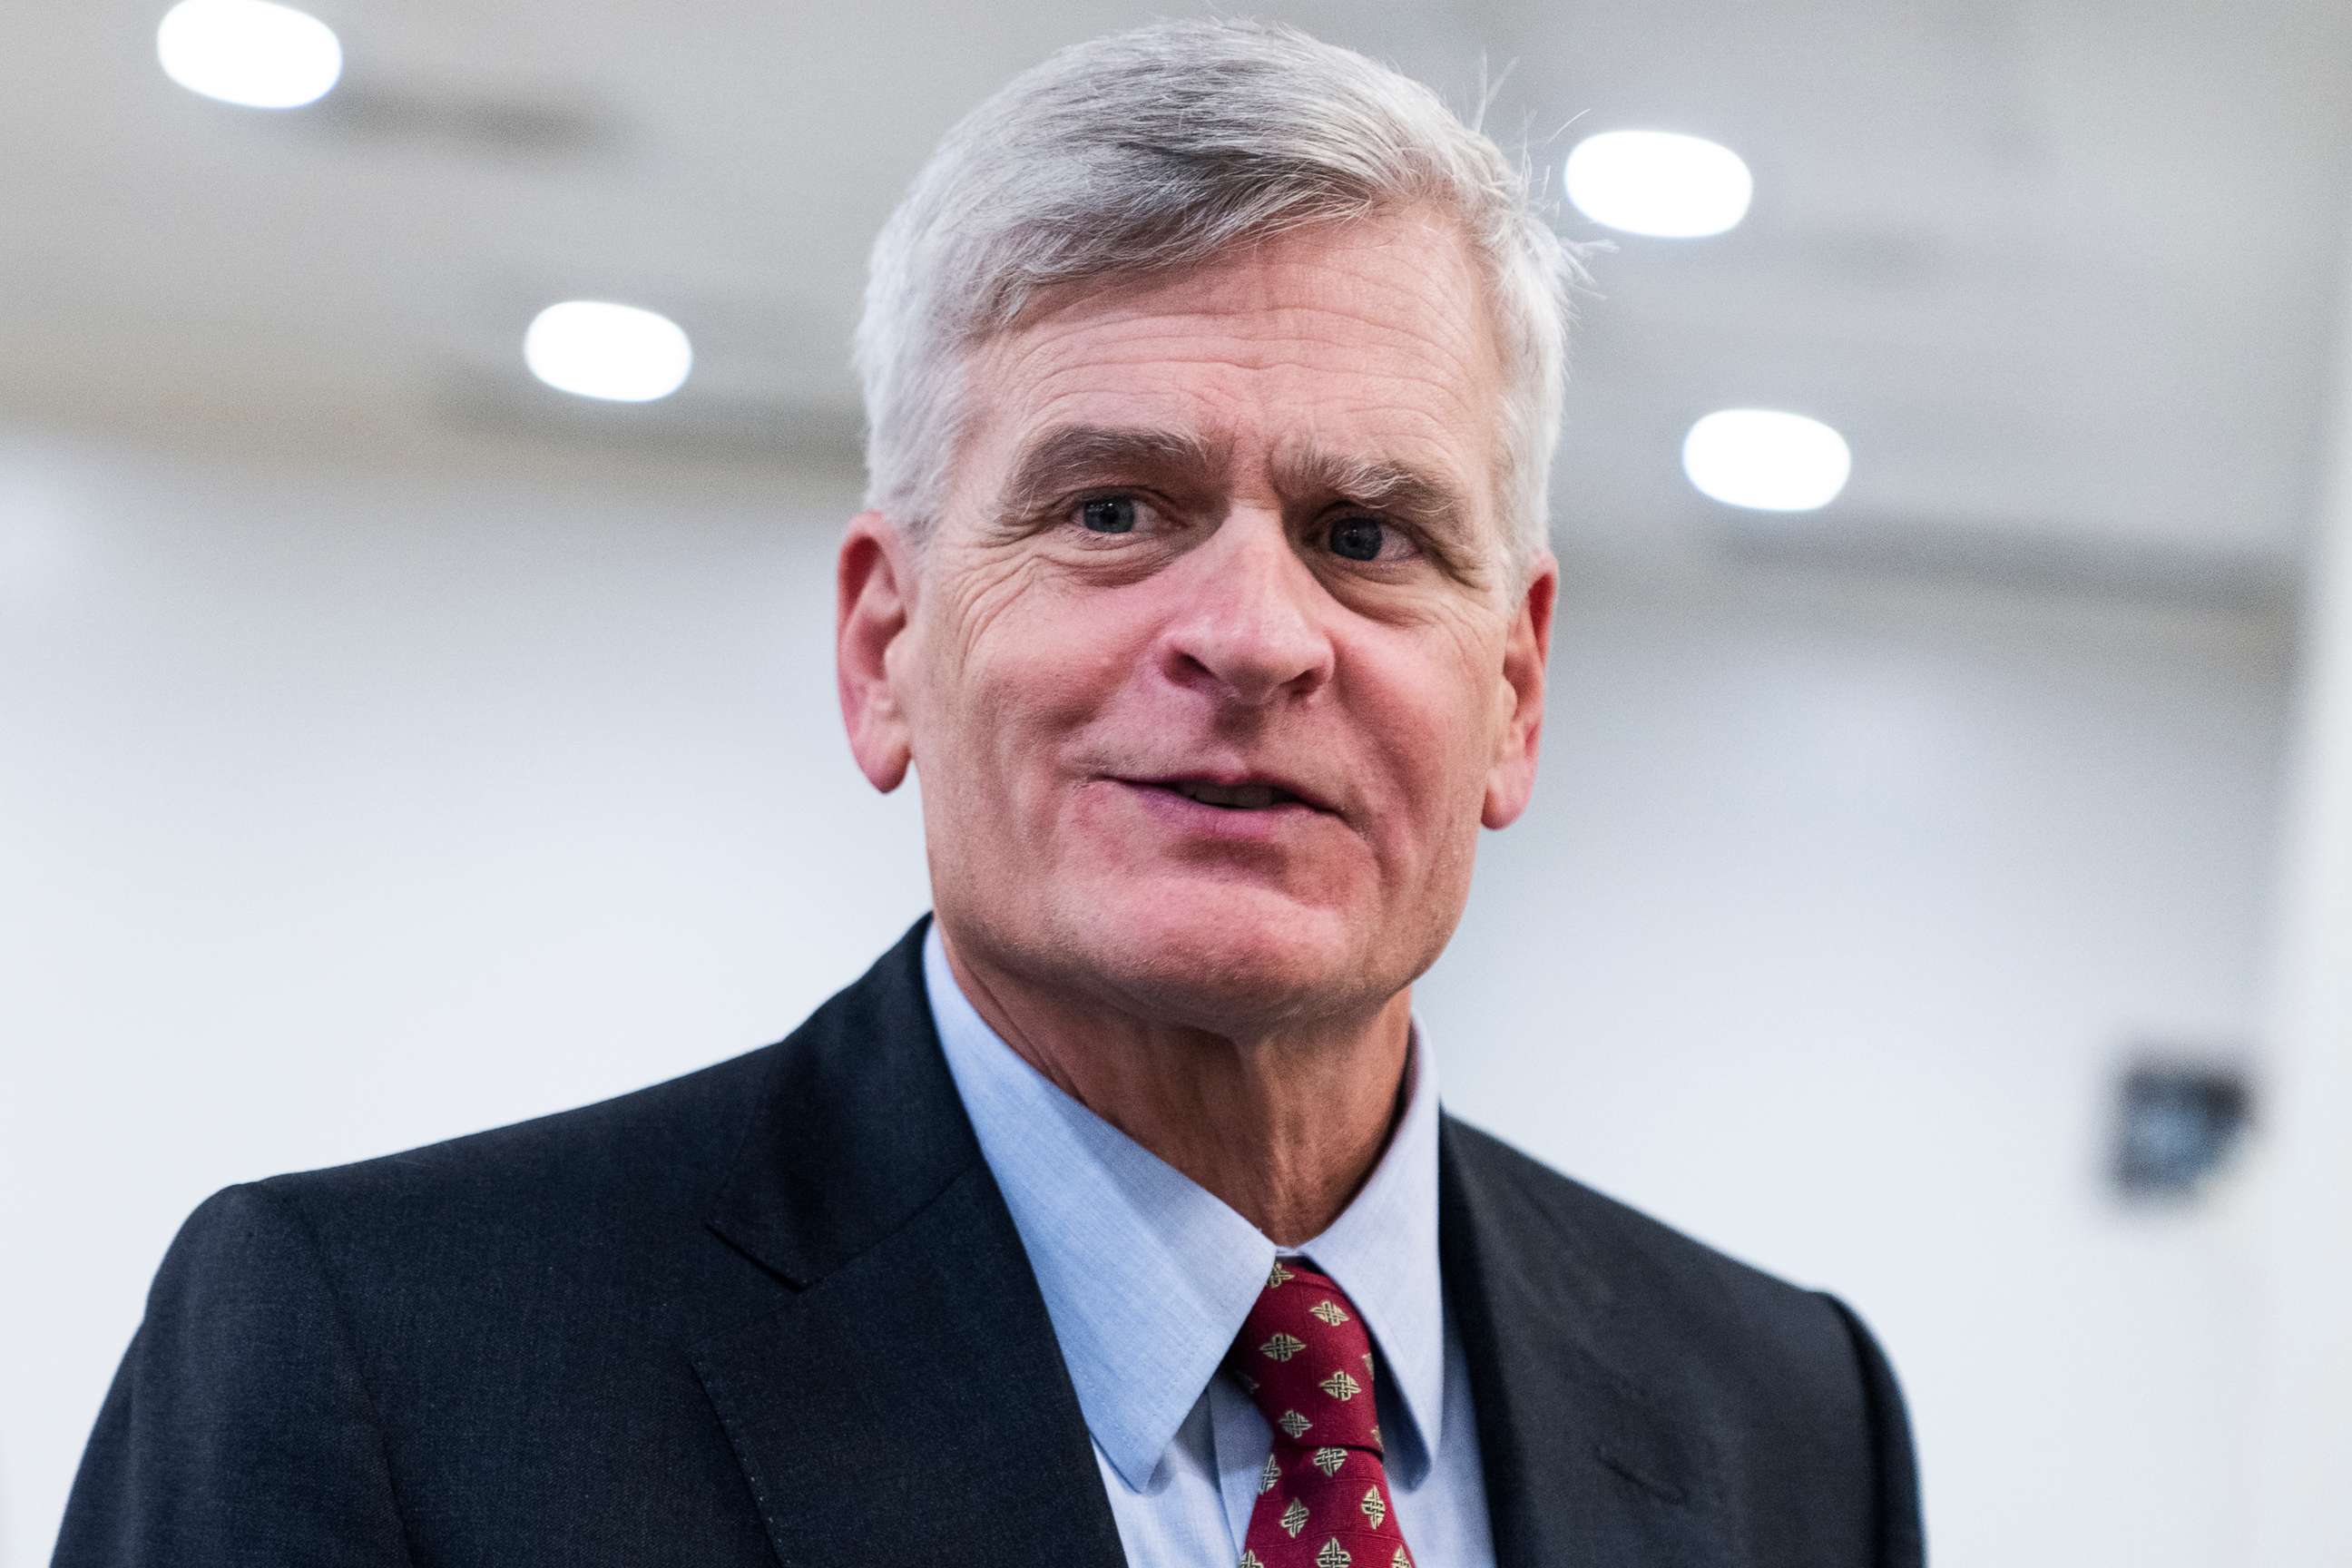 PHOTO: In this June 23, 2022, file photo, Sen. Bill Cassidy is shown in the U.S. Capitol in Washington, D.C.